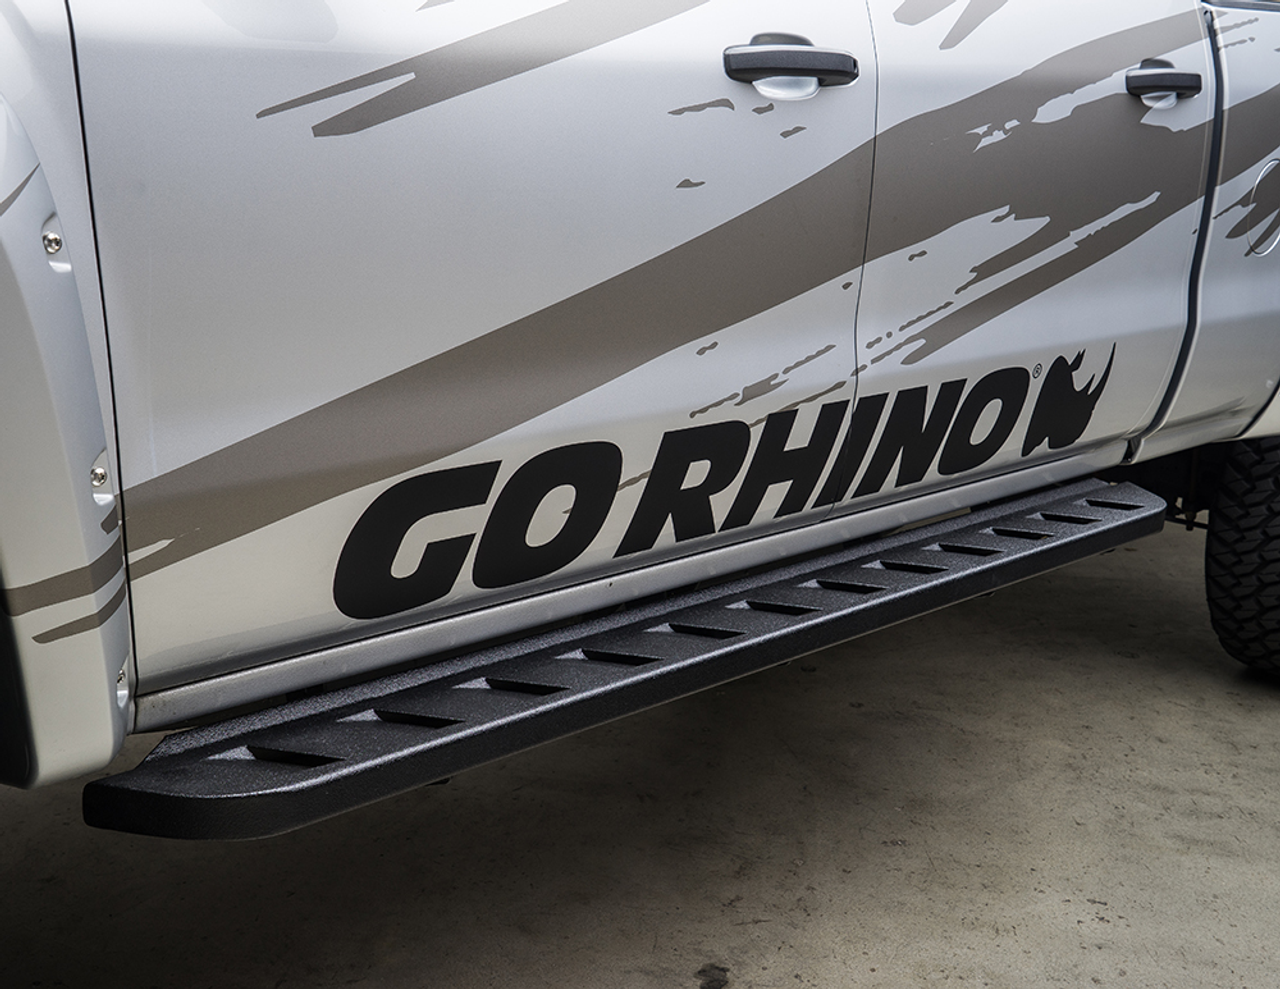 Go Rhino 6342358020PC Chevrolet, Colorado, 2015 - 2021, RB10 Running boards - Complete Kit:  2 pair RB10 Drop Steps, Galvanized Steel, Textured black, 630080PC RB10 + 6942355 RB Brackets + (2) 69420000PC Drop Down Step